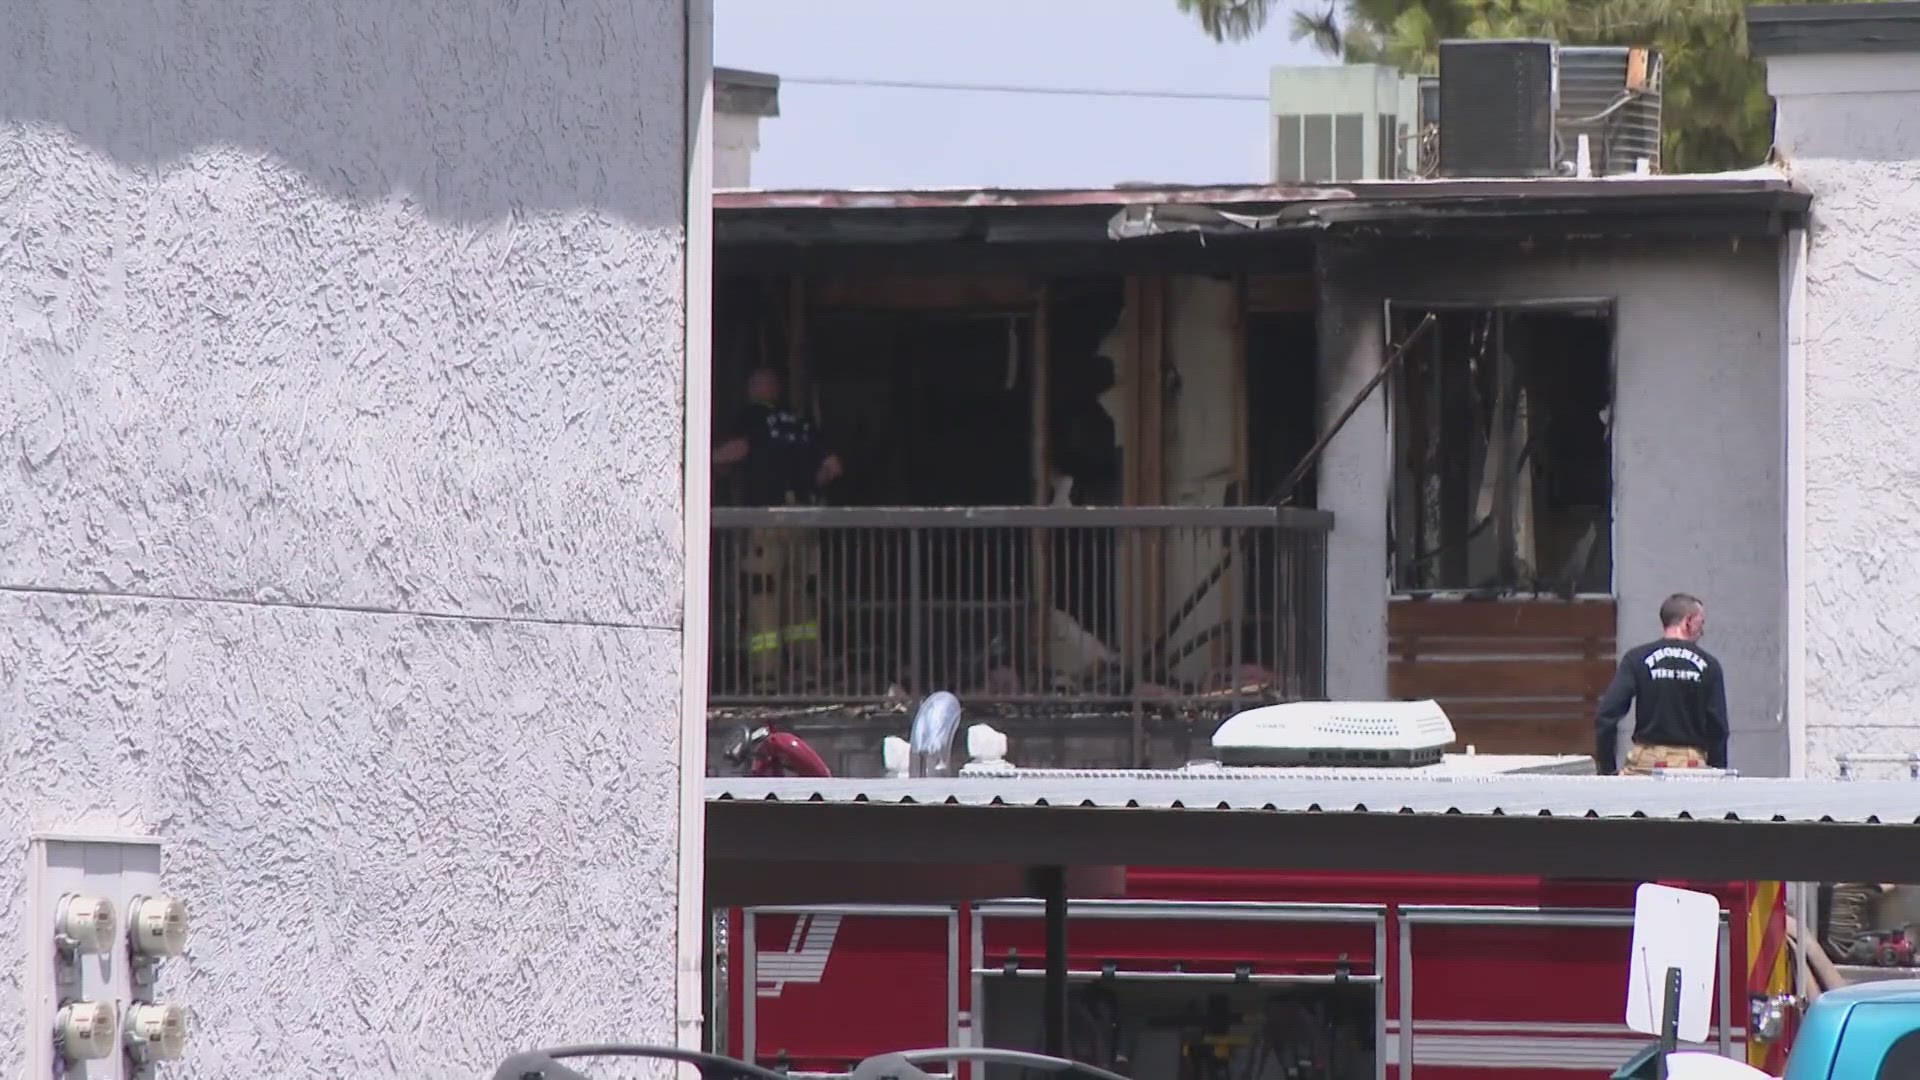 The fire broke out Saturday afternoon at an apartment complex near 27th Avenue and Cactus Road.